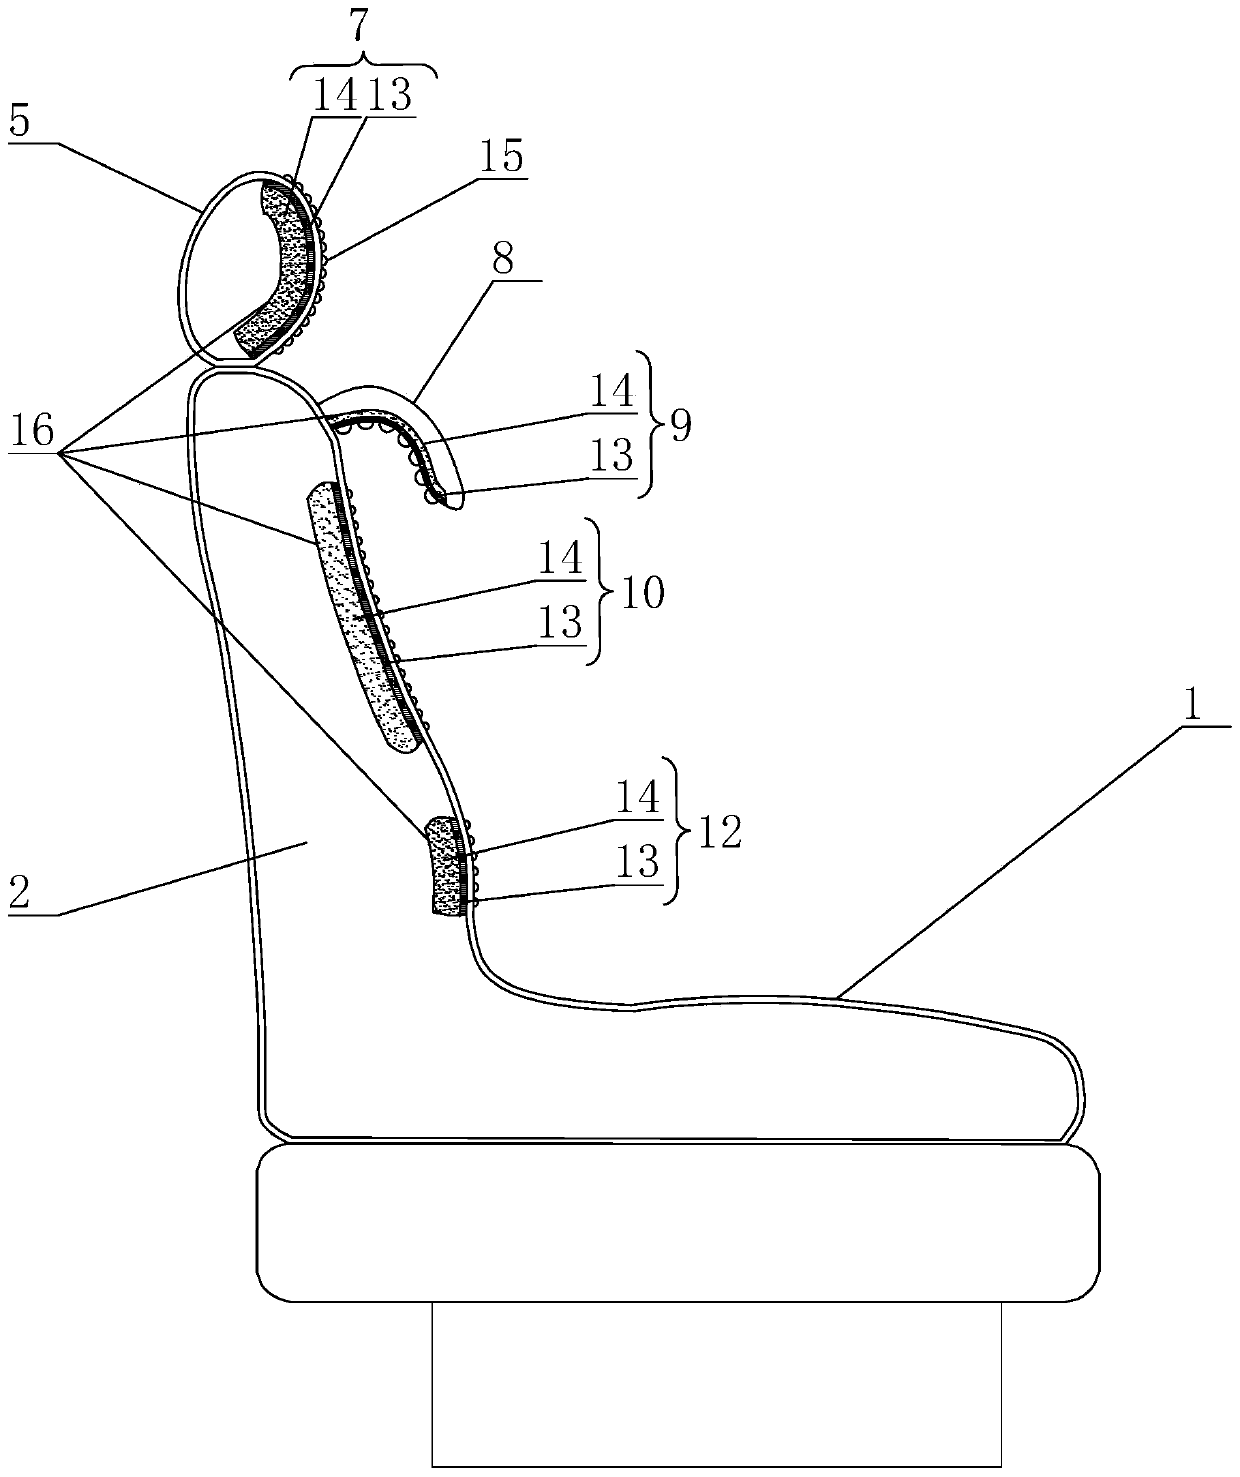 Automatic massage armchair based on music treatment